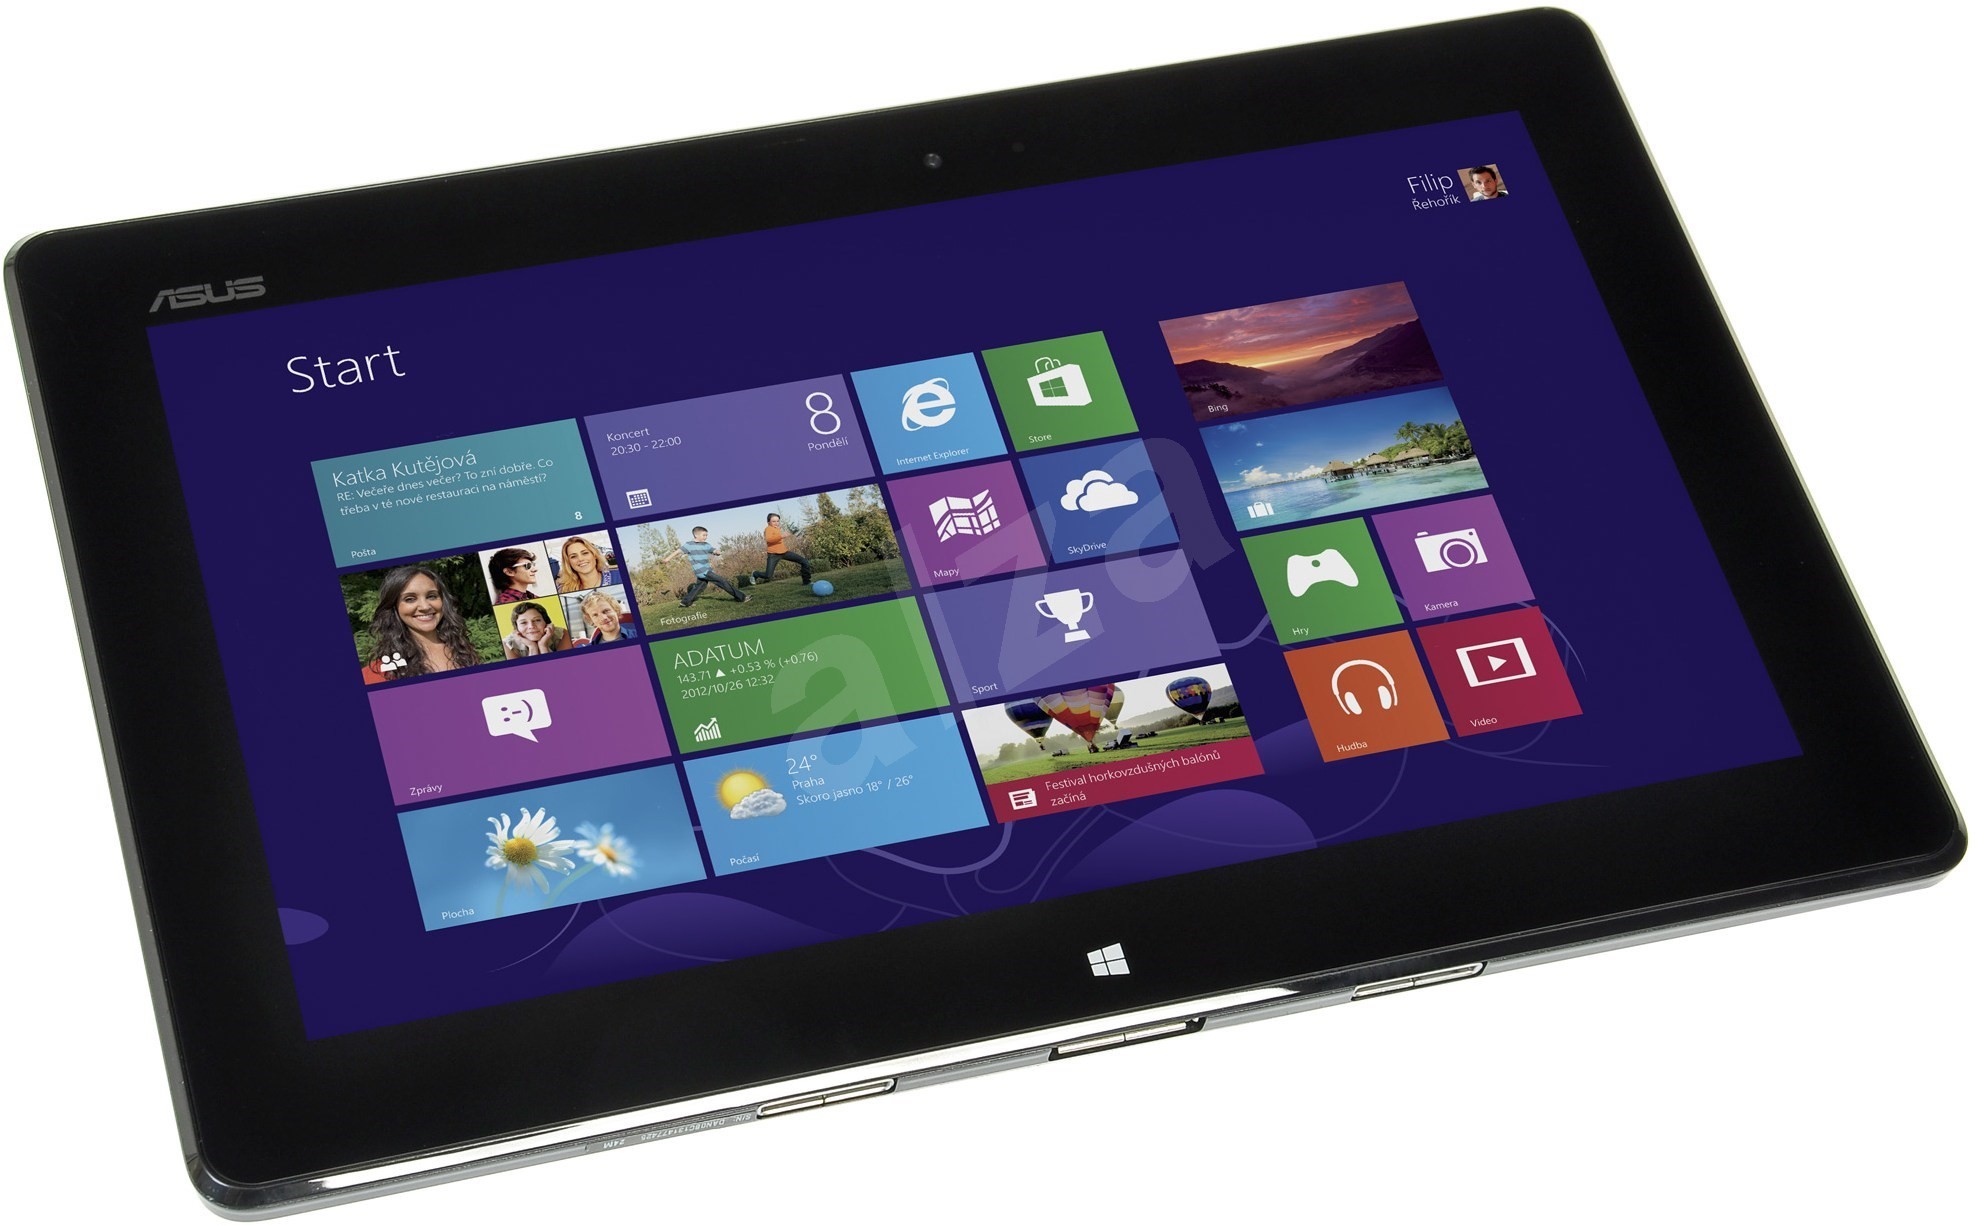 70 List Asus Transformer Book T100Ta 32Gb 500Gb from Famous authors